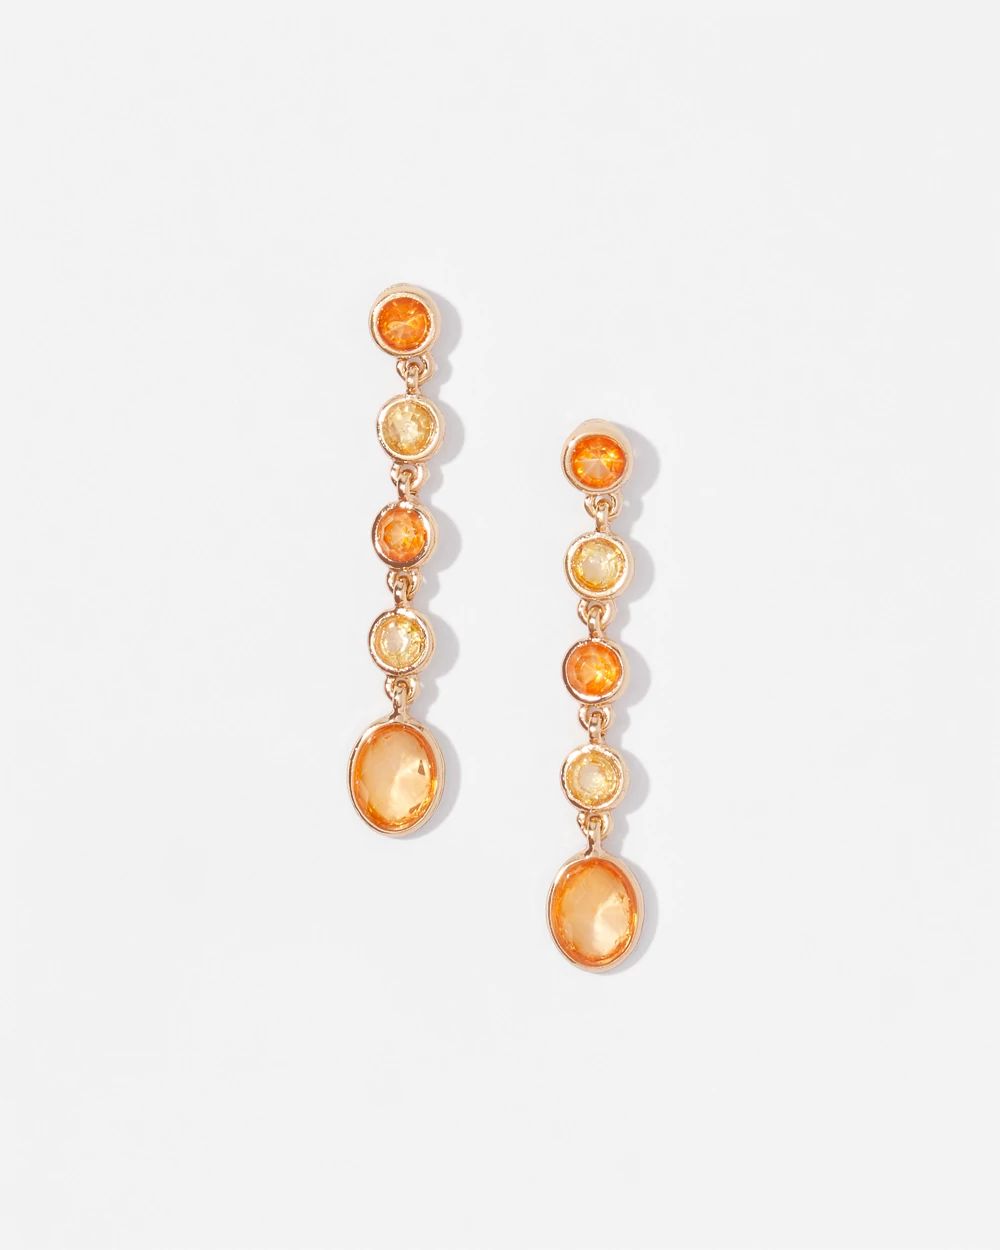 Gold + Peach Crystal Drop Earrings click to view larger image.